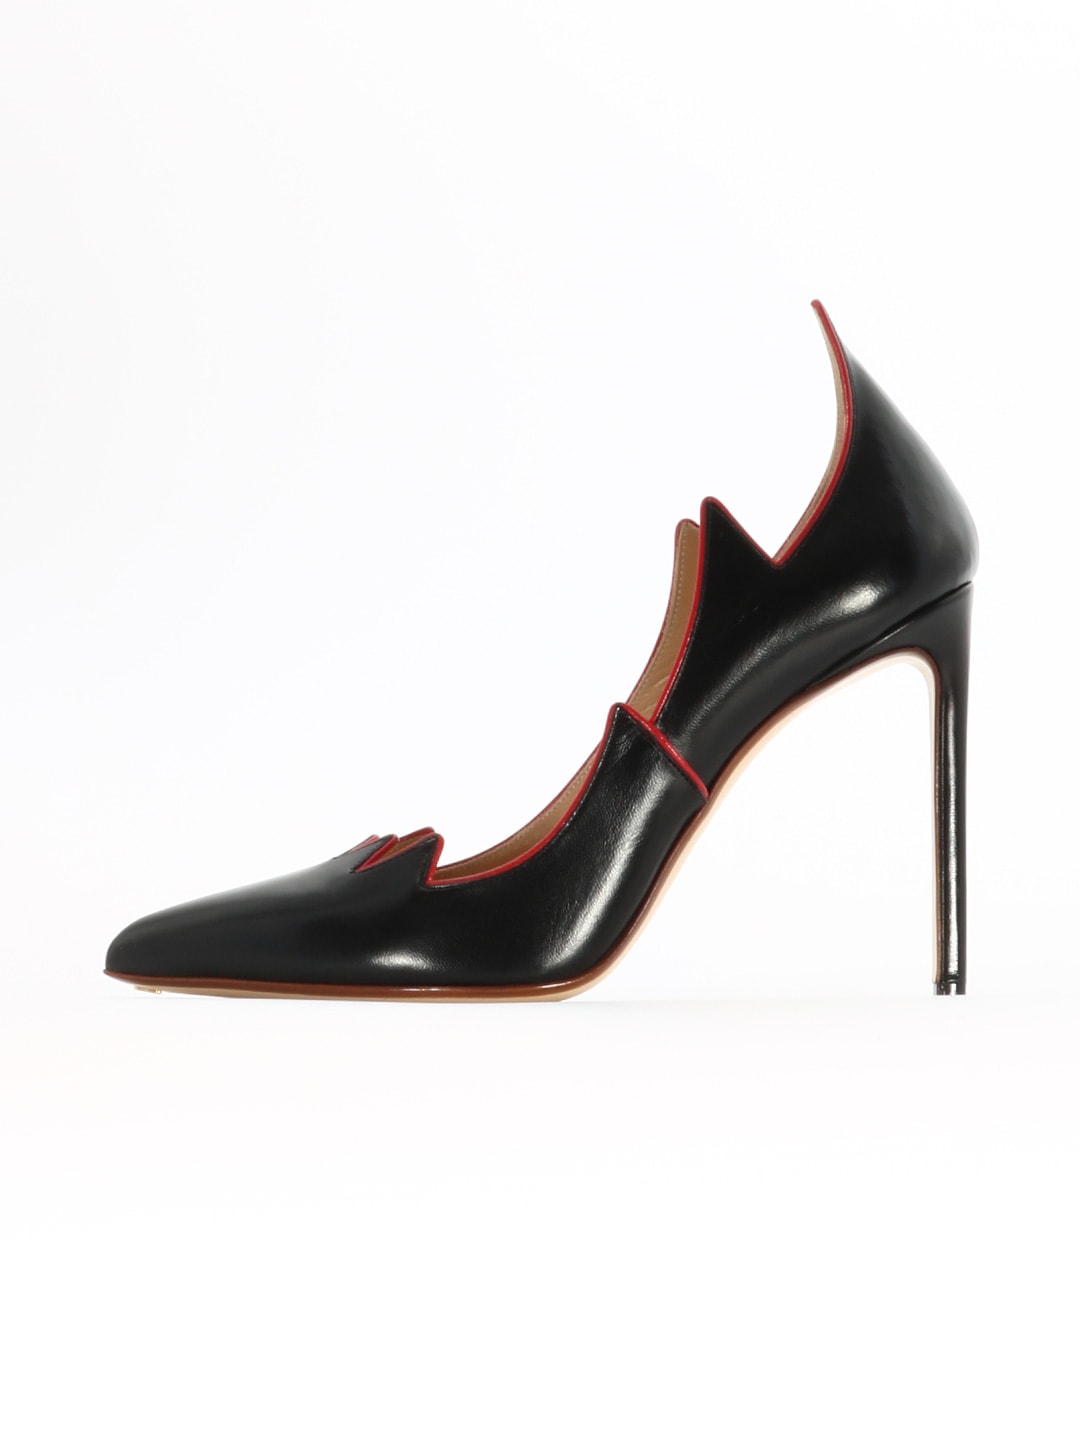 Buy Francesco Russo Black Leather Flame Pump online, shop Francesco Russo shoes with free shipping